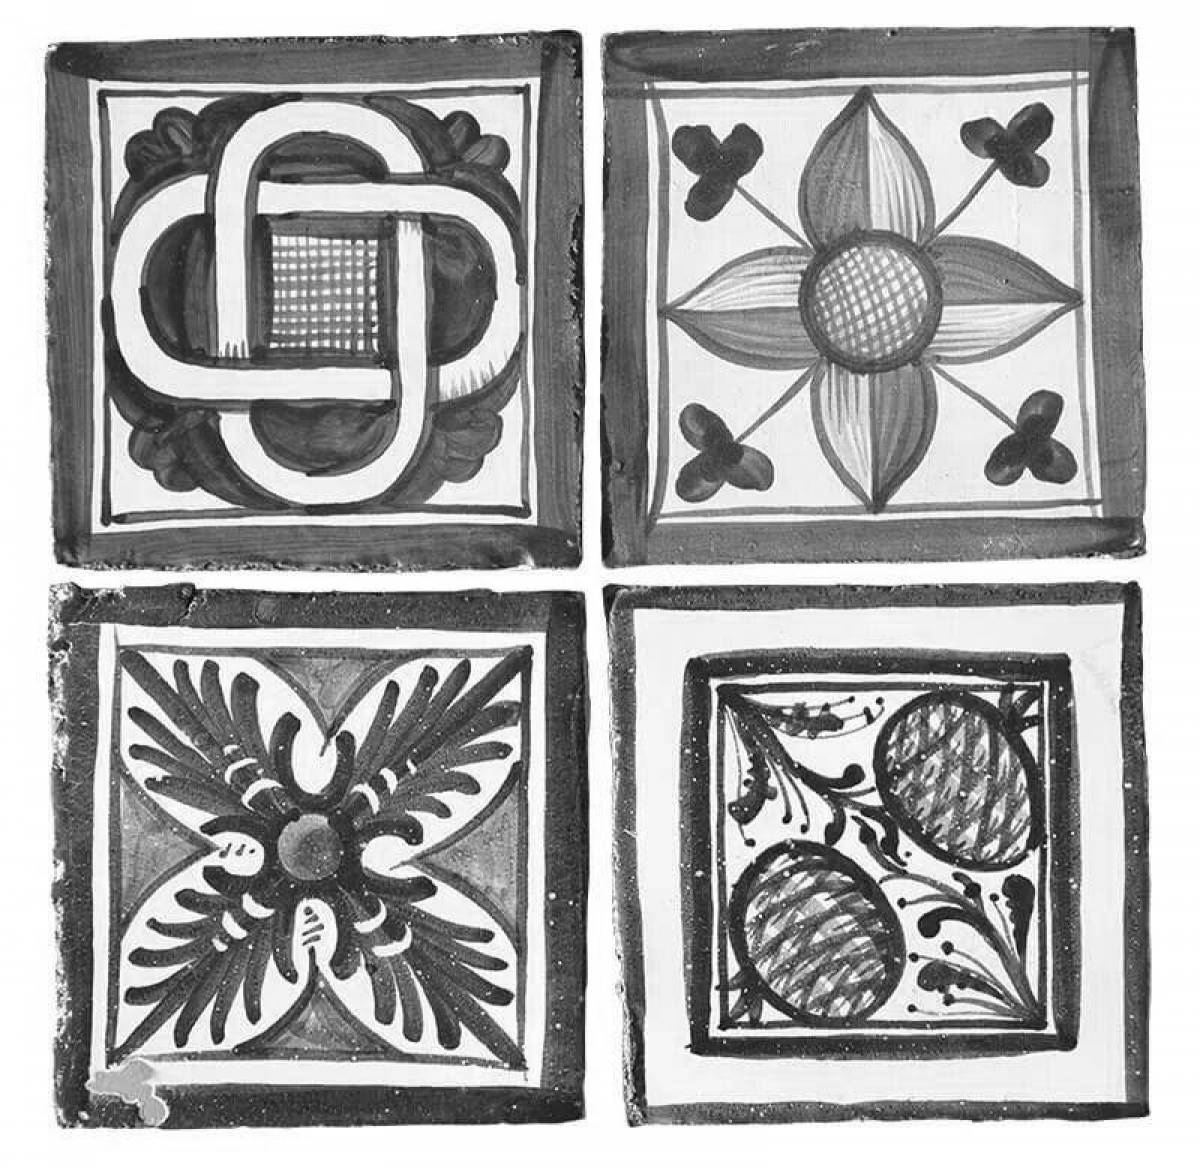 Intricate ceramic tile coloring page